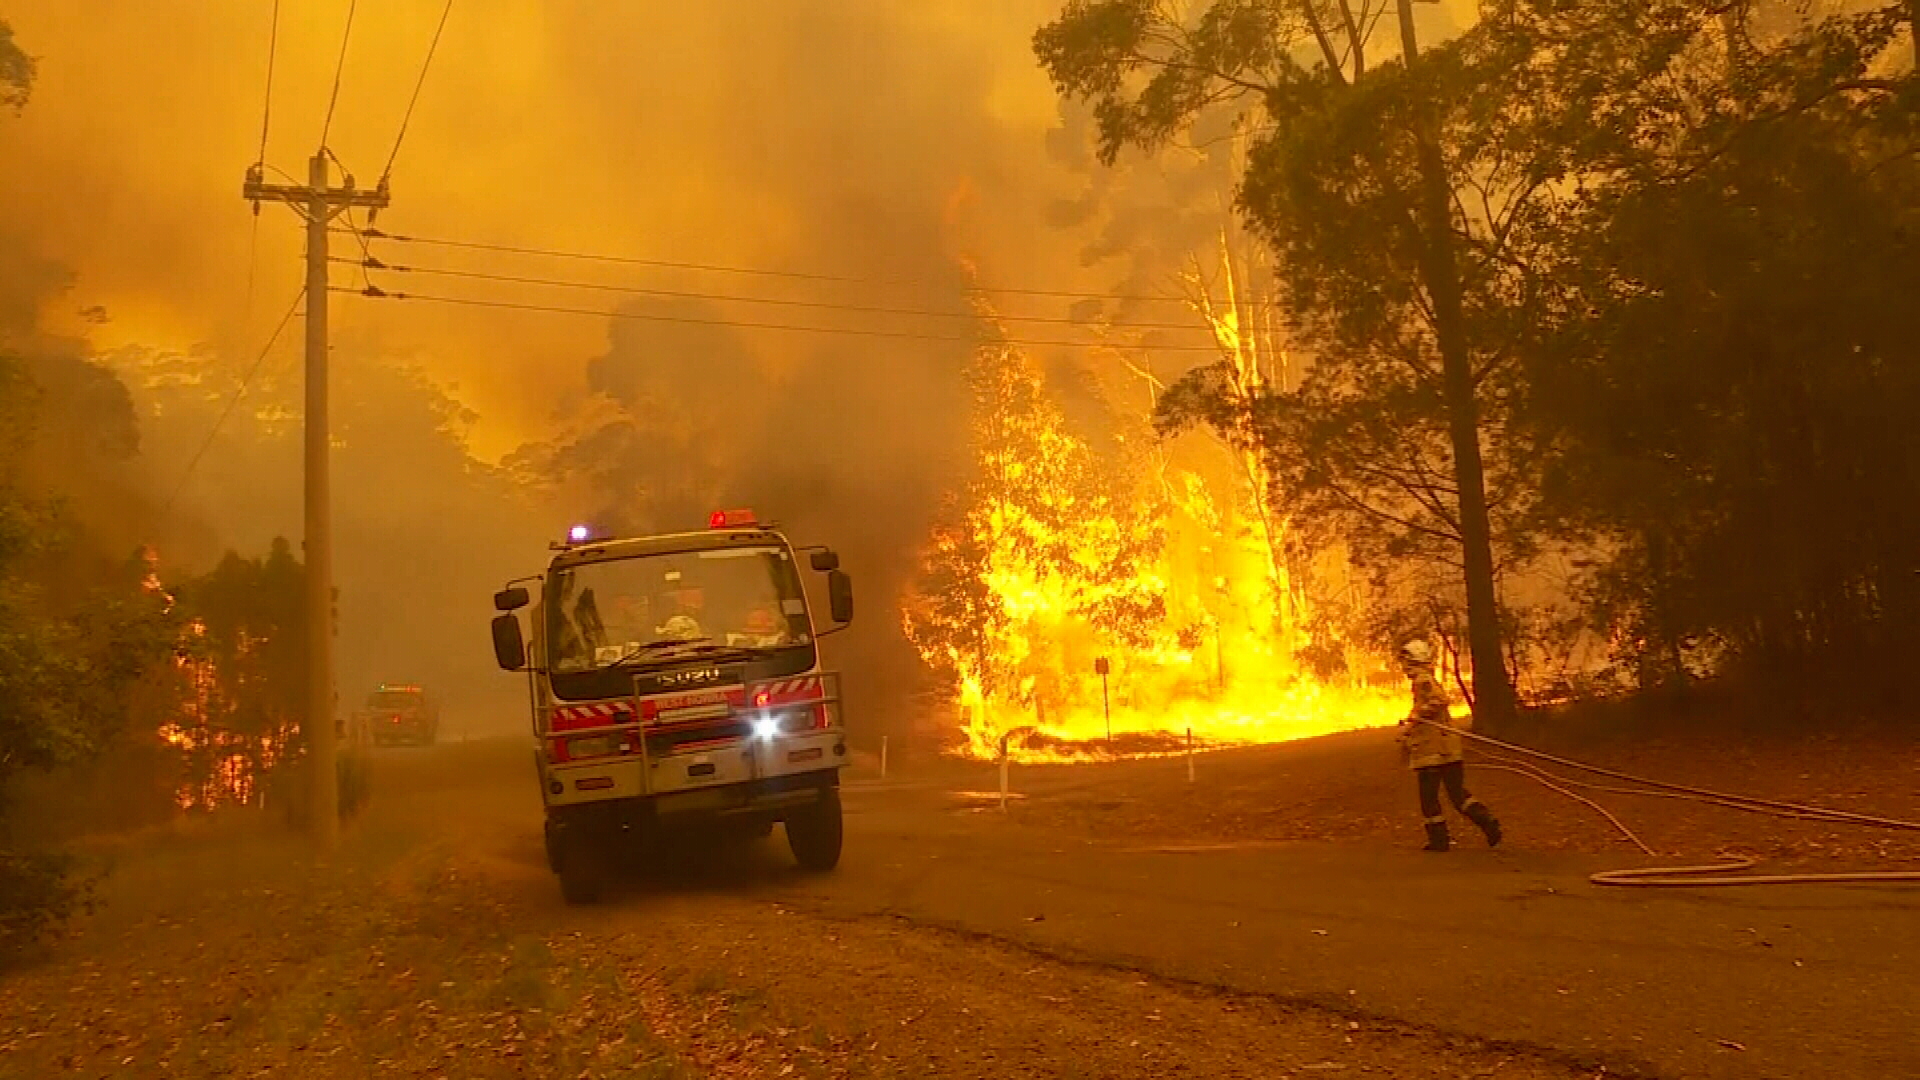 Homes have been confirmed lost in the fires burning at Bawley point on the South Coast of NSW.